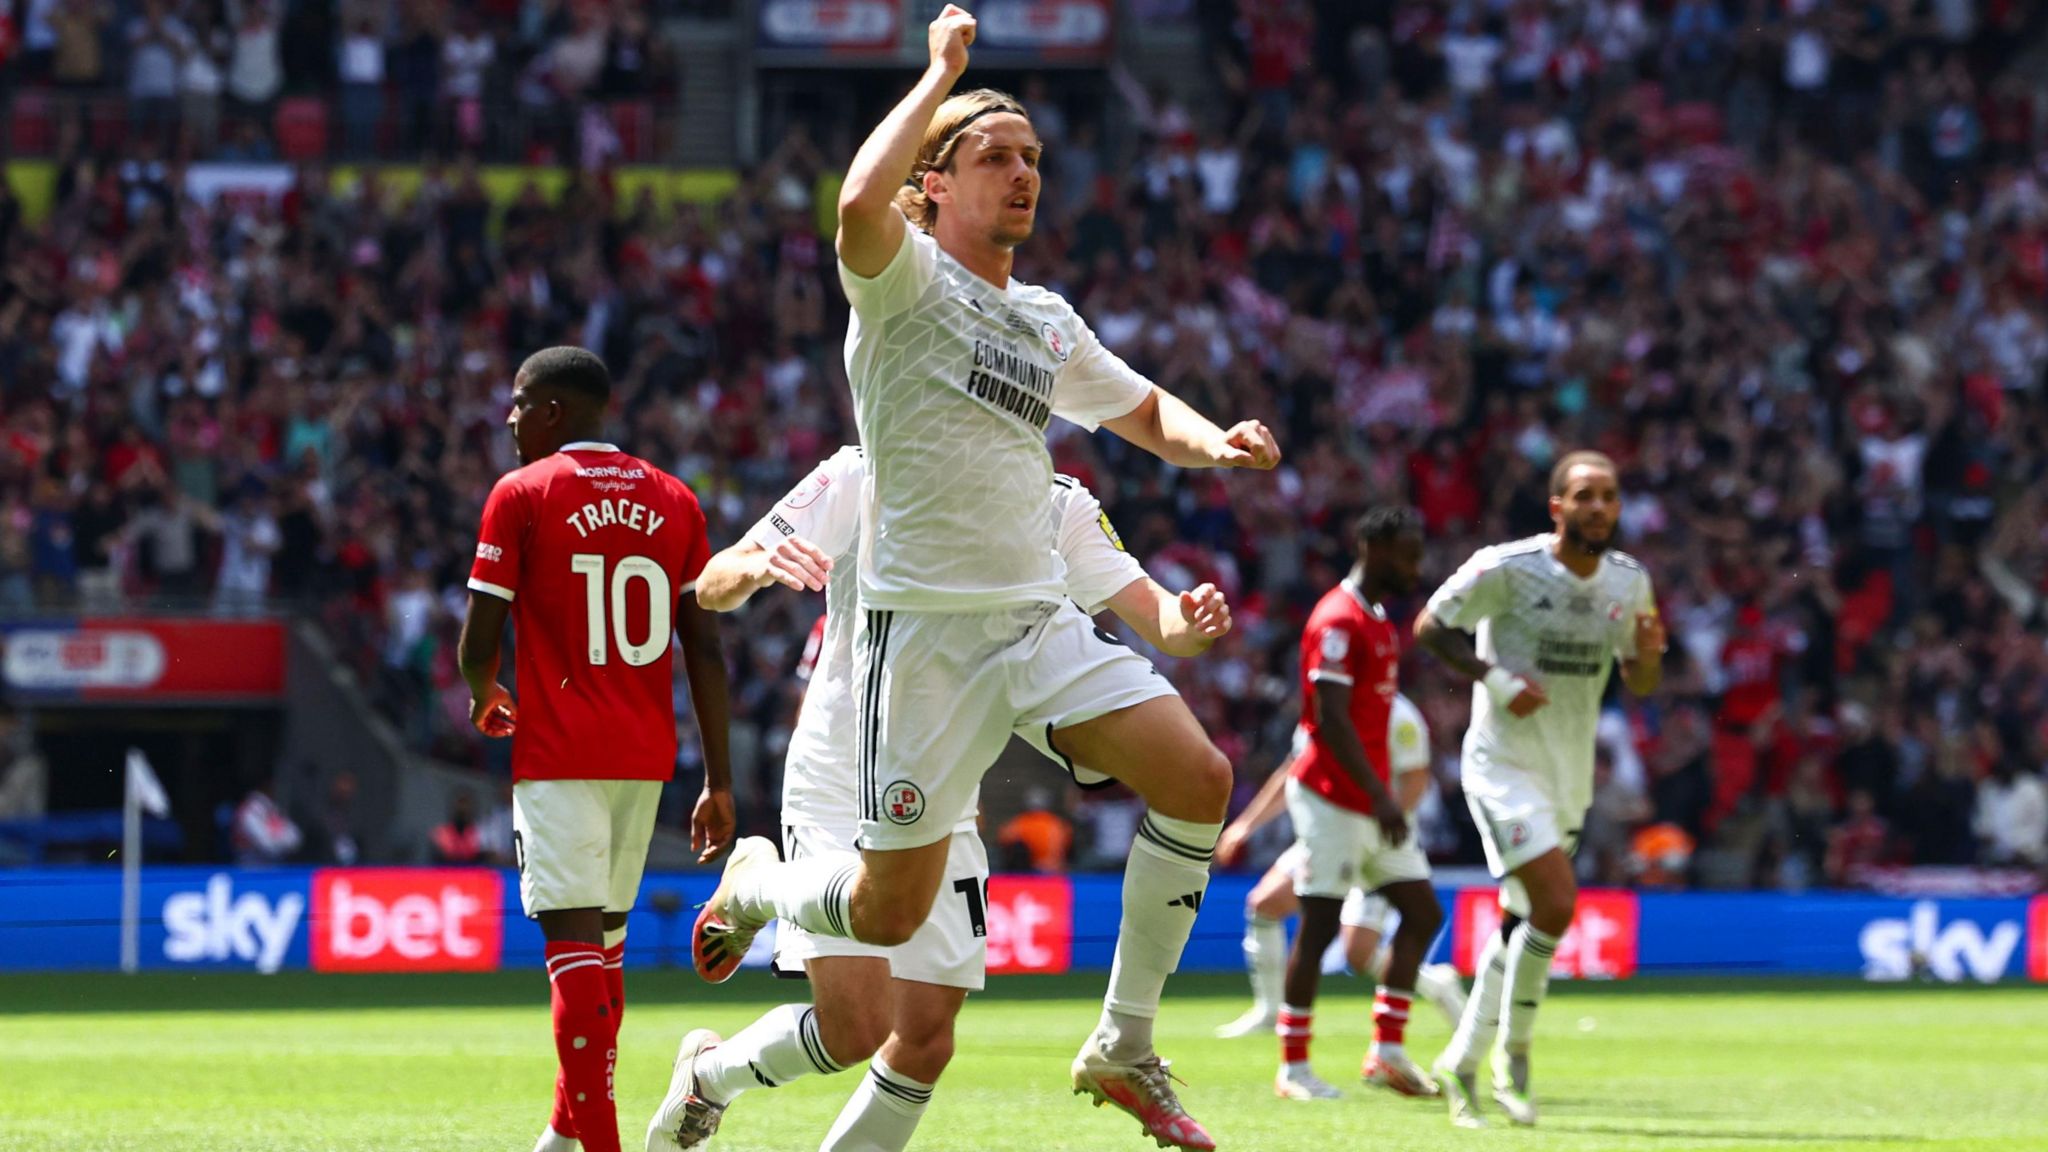 Danilo Orsi celebrates scoring against Crewe Alexandra in the League Two play-off final at Wembley